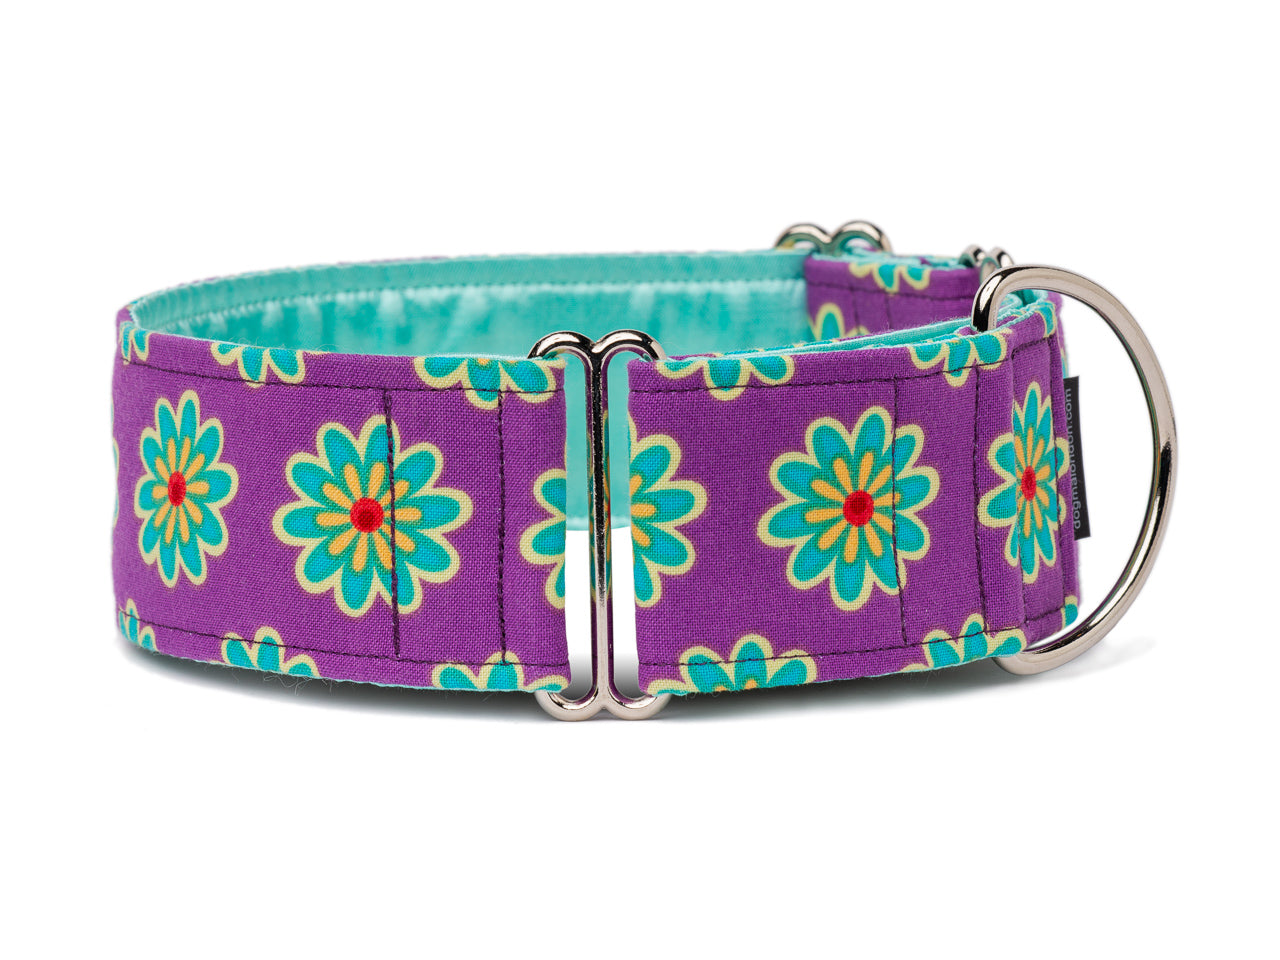 Cheerful blue flowers on a pretty purple collar will brighten up any pooch's day!